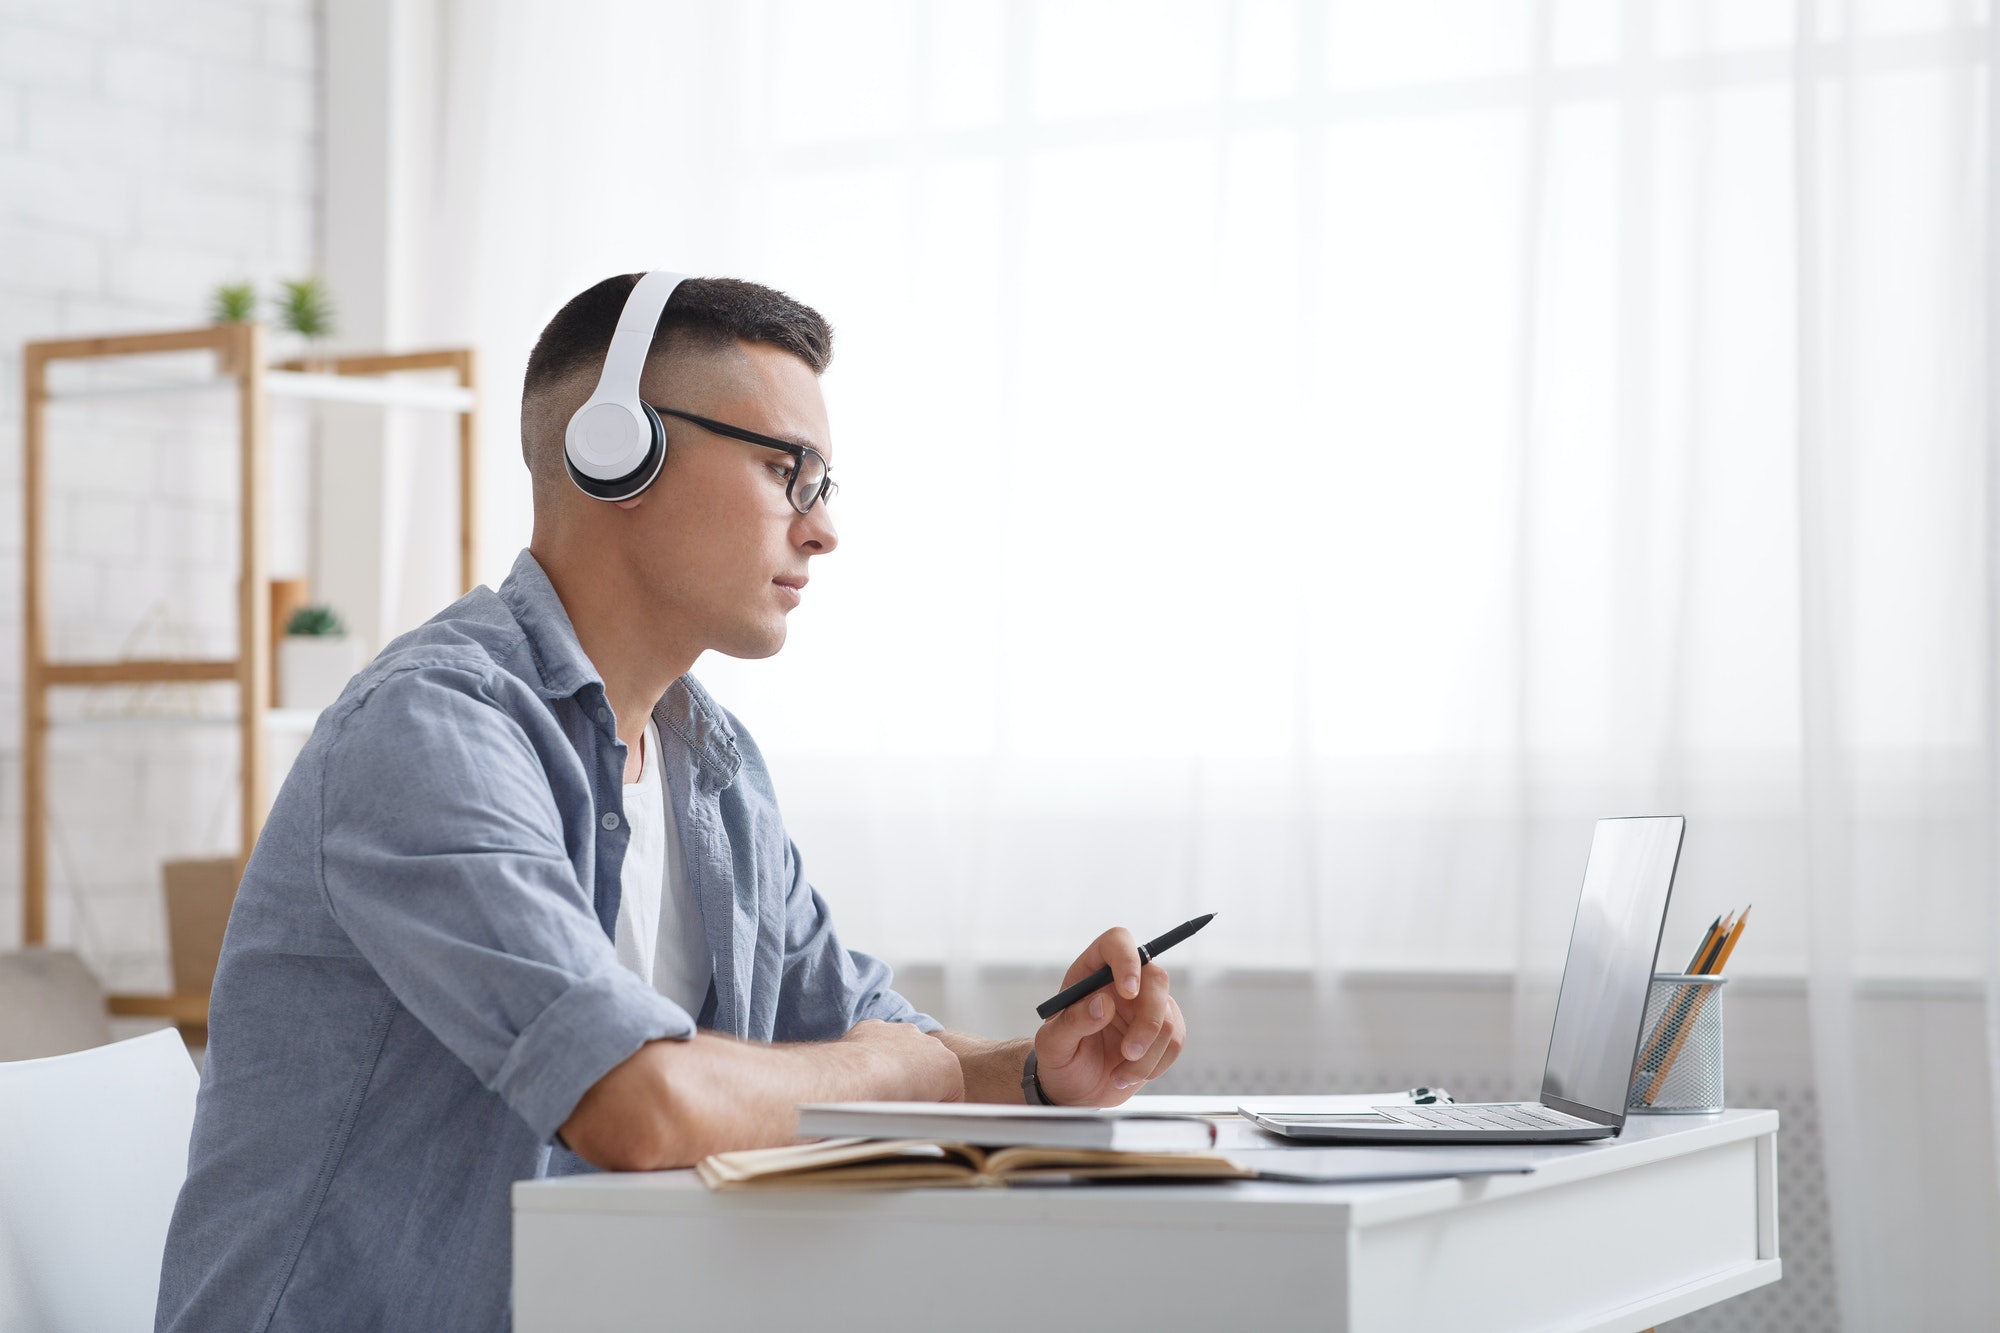 online education and work at home young man in headphones holds pen and looks at laptop sitting at